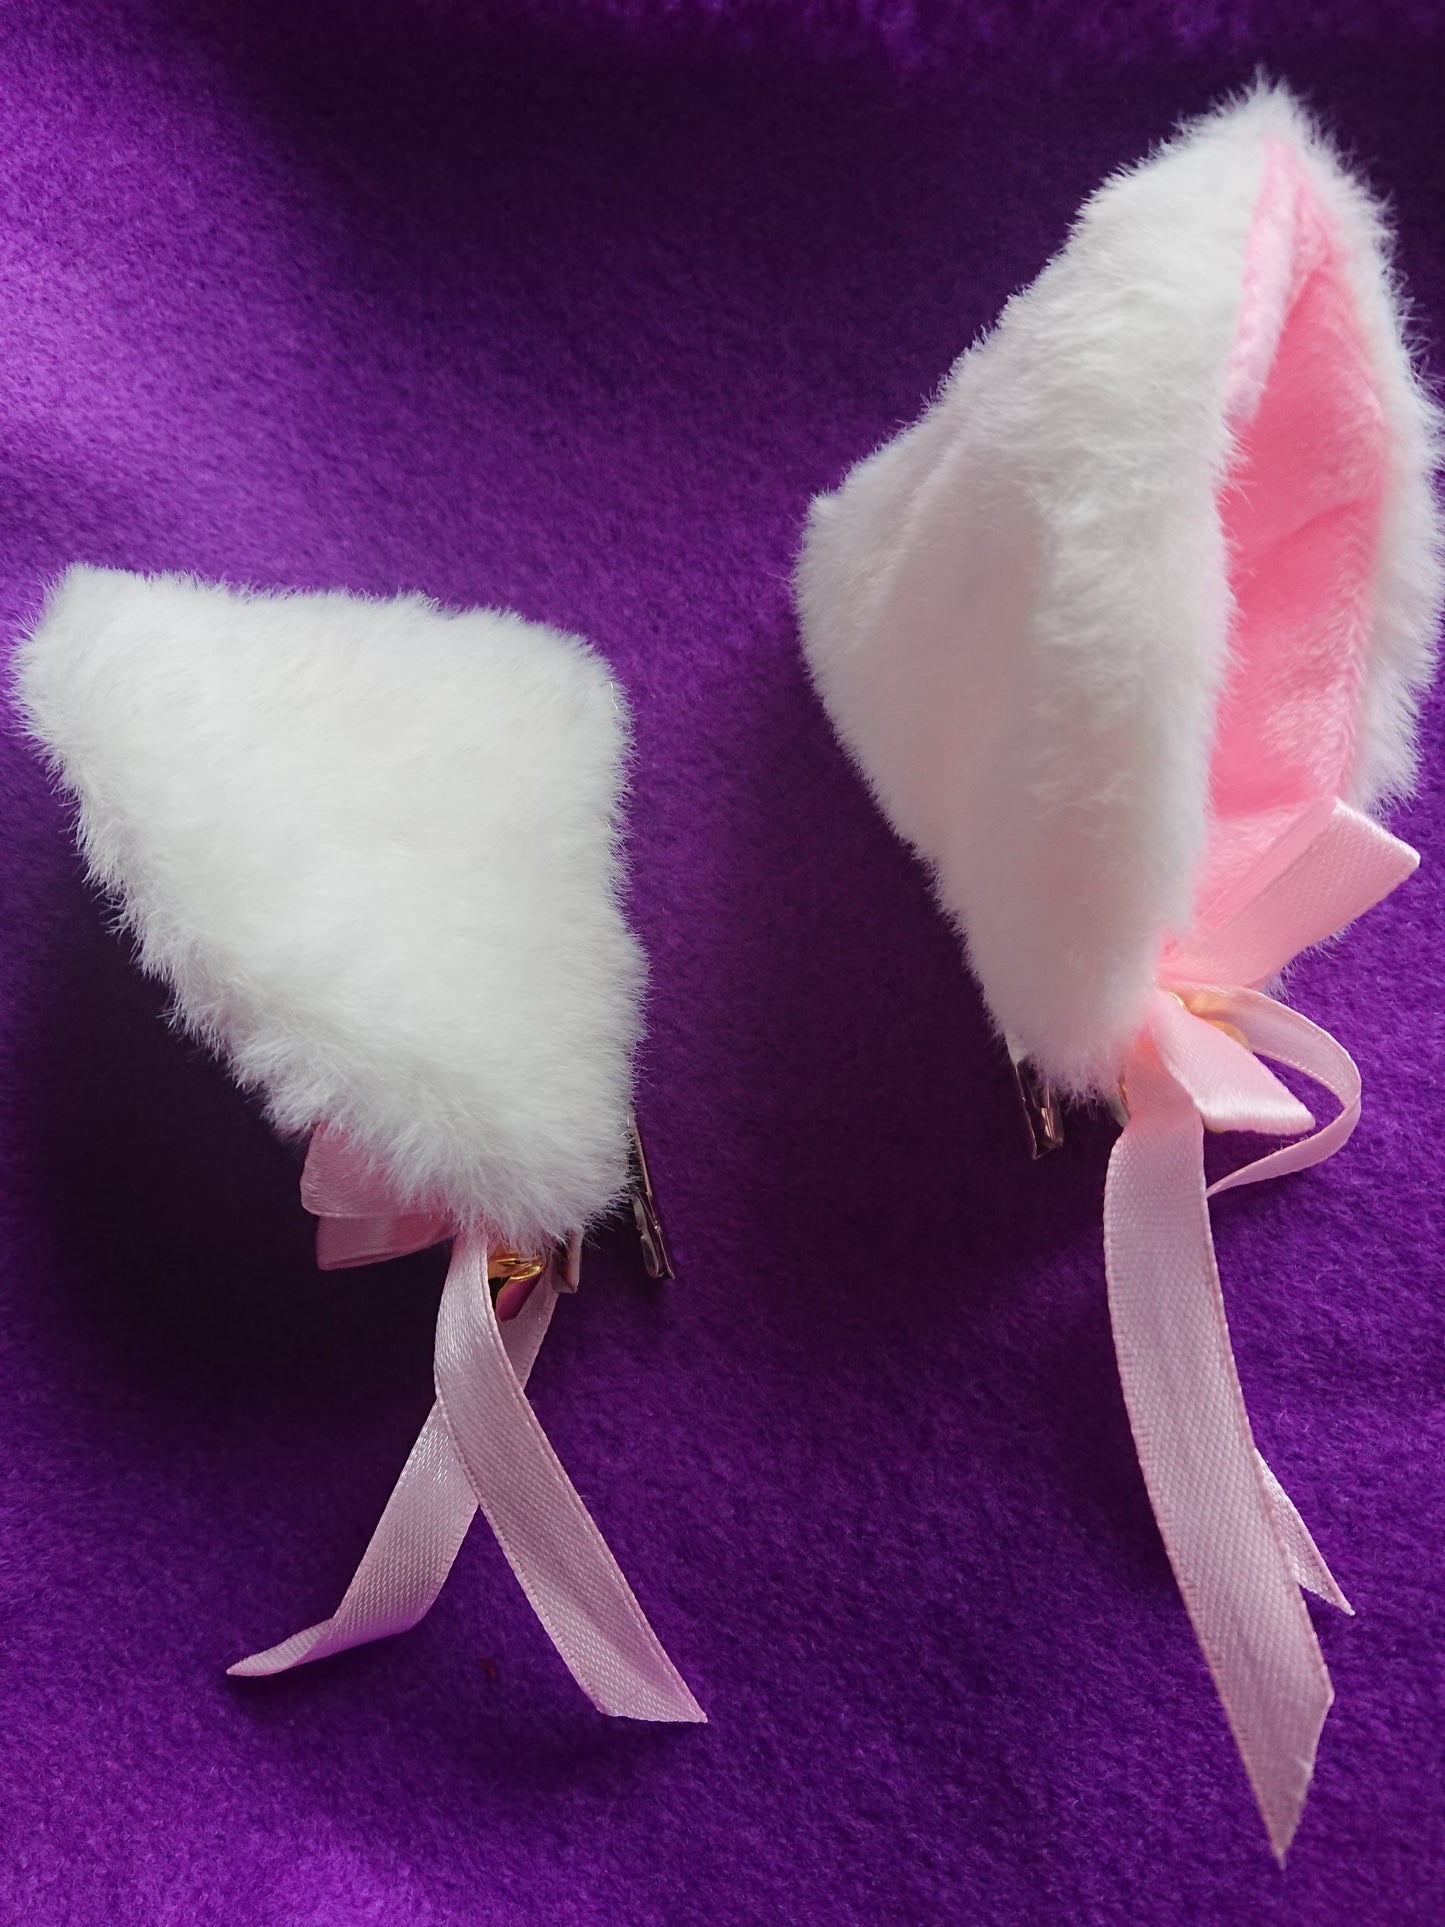 Cat Cosplay Ears - Clip On - 2 Colours